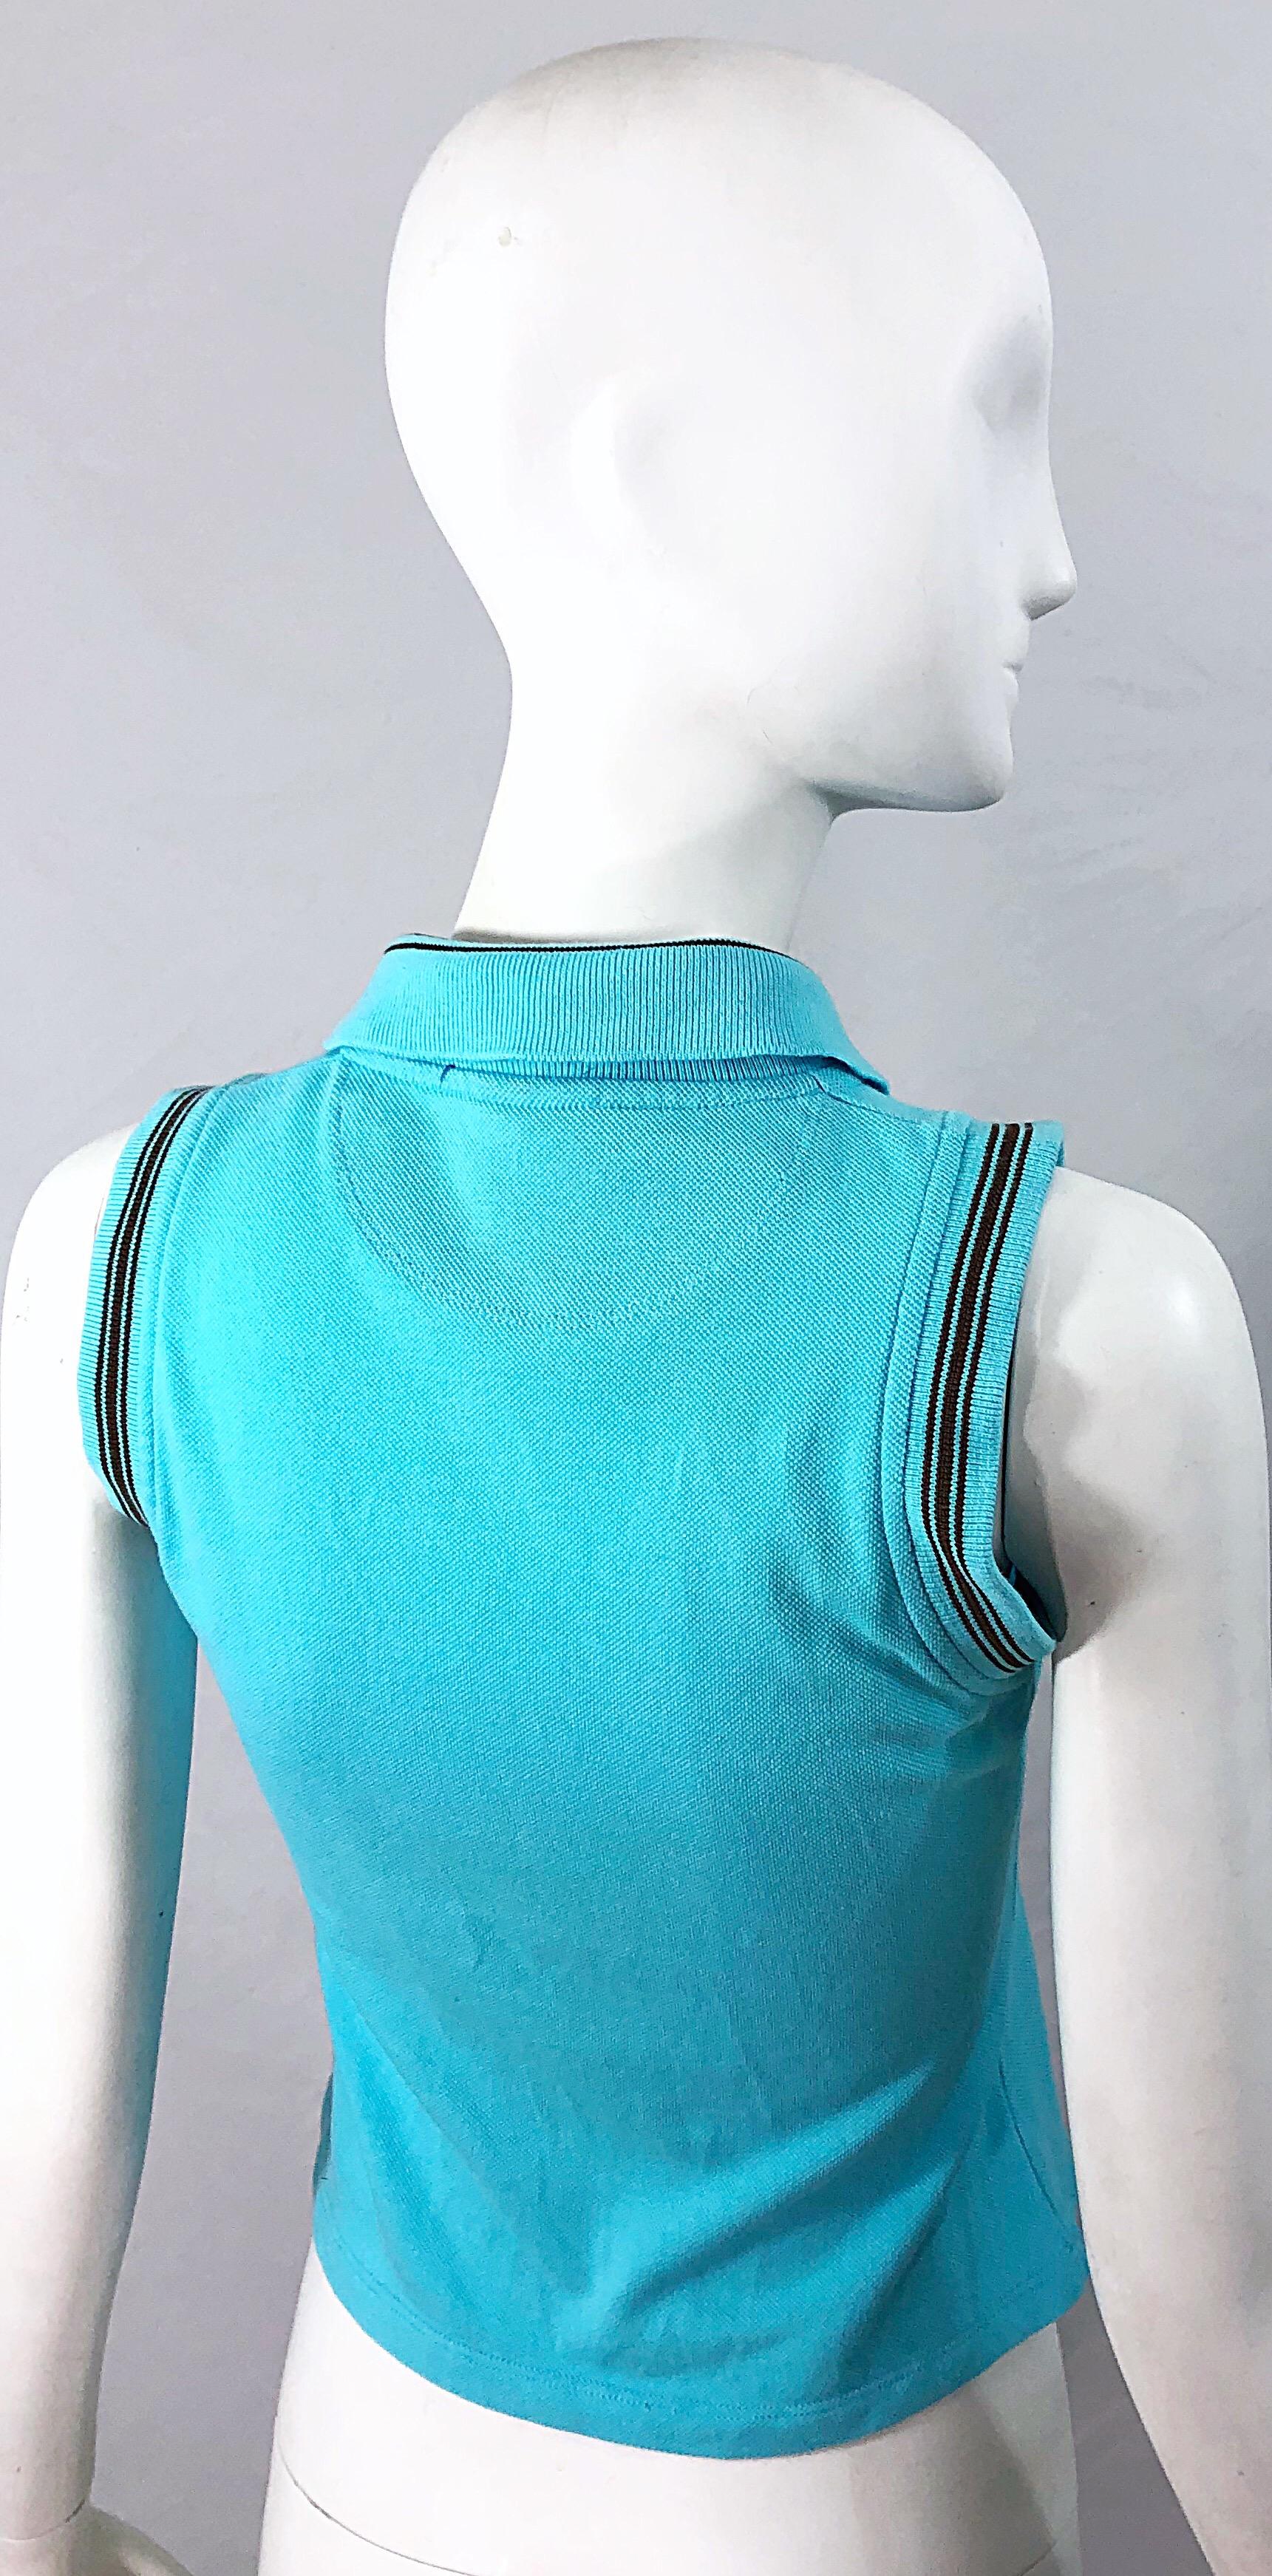 Vintage Dolce & Gabbana 1990s Turquoise Blue + Brown Logo 90s Knit Crop Top Polo In Excellent Condition For Sale In San Diego, CA